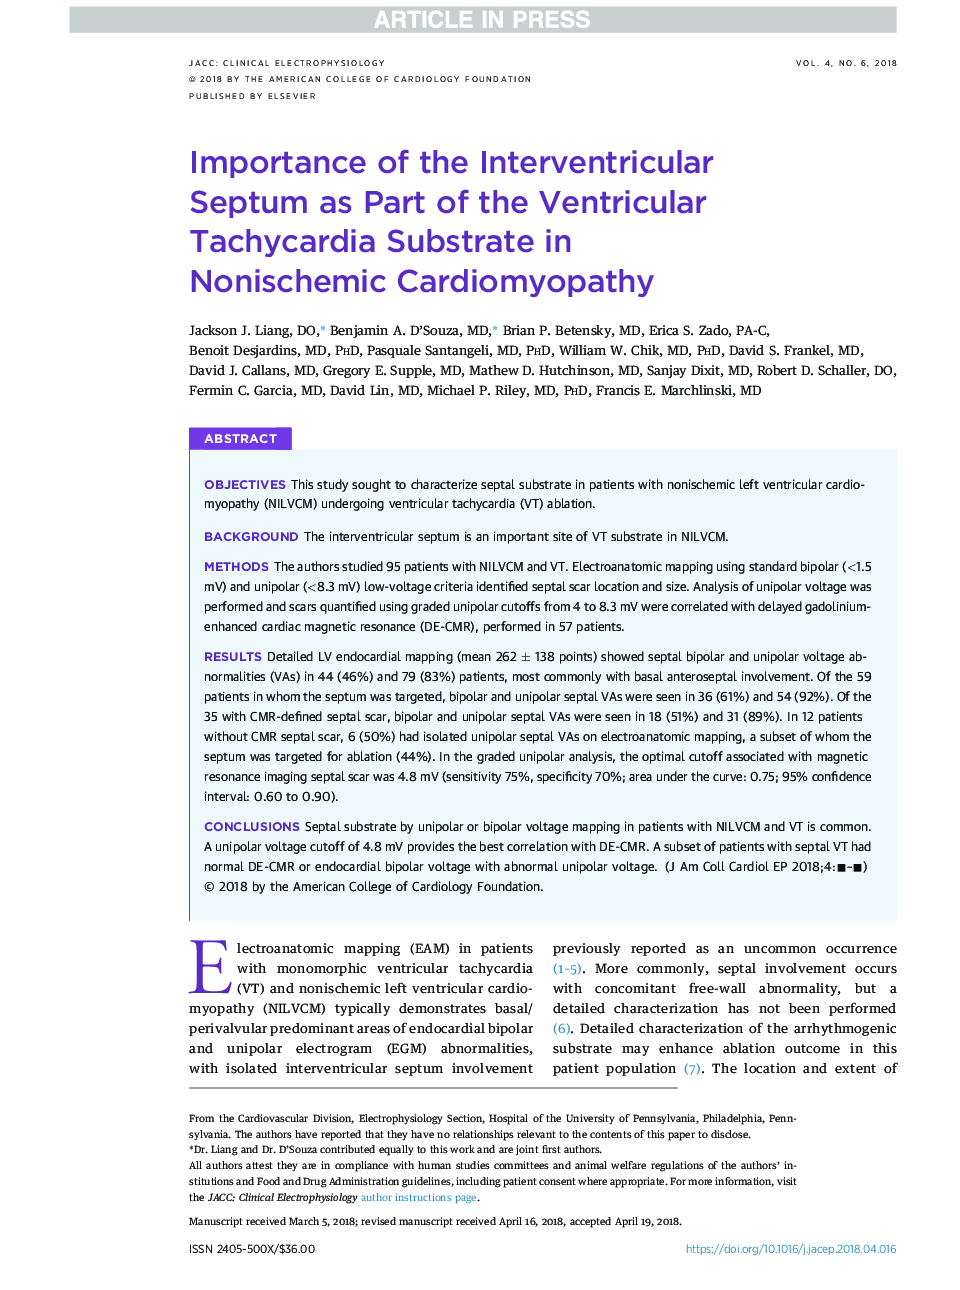 Importance of the Interventricular Septum as Part of the Ventricular Tachycardia Substrate in NonischemicÂ Cardiomyopathy